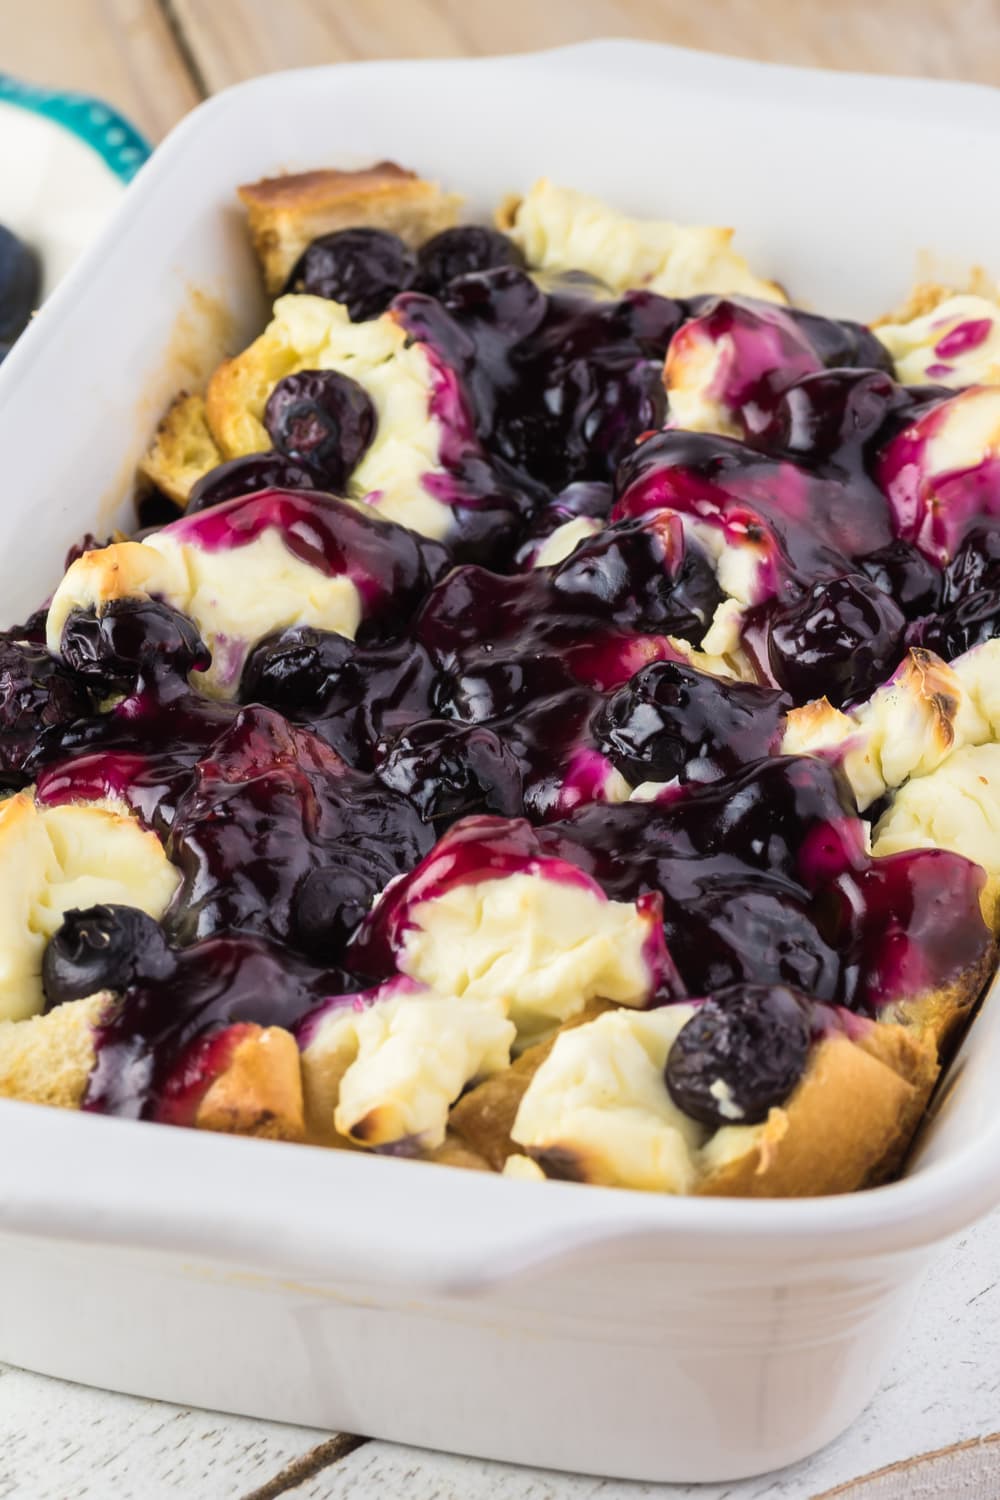 Breakfast Casserole full of blueberries, cream cheese, bread, and maple syrup.